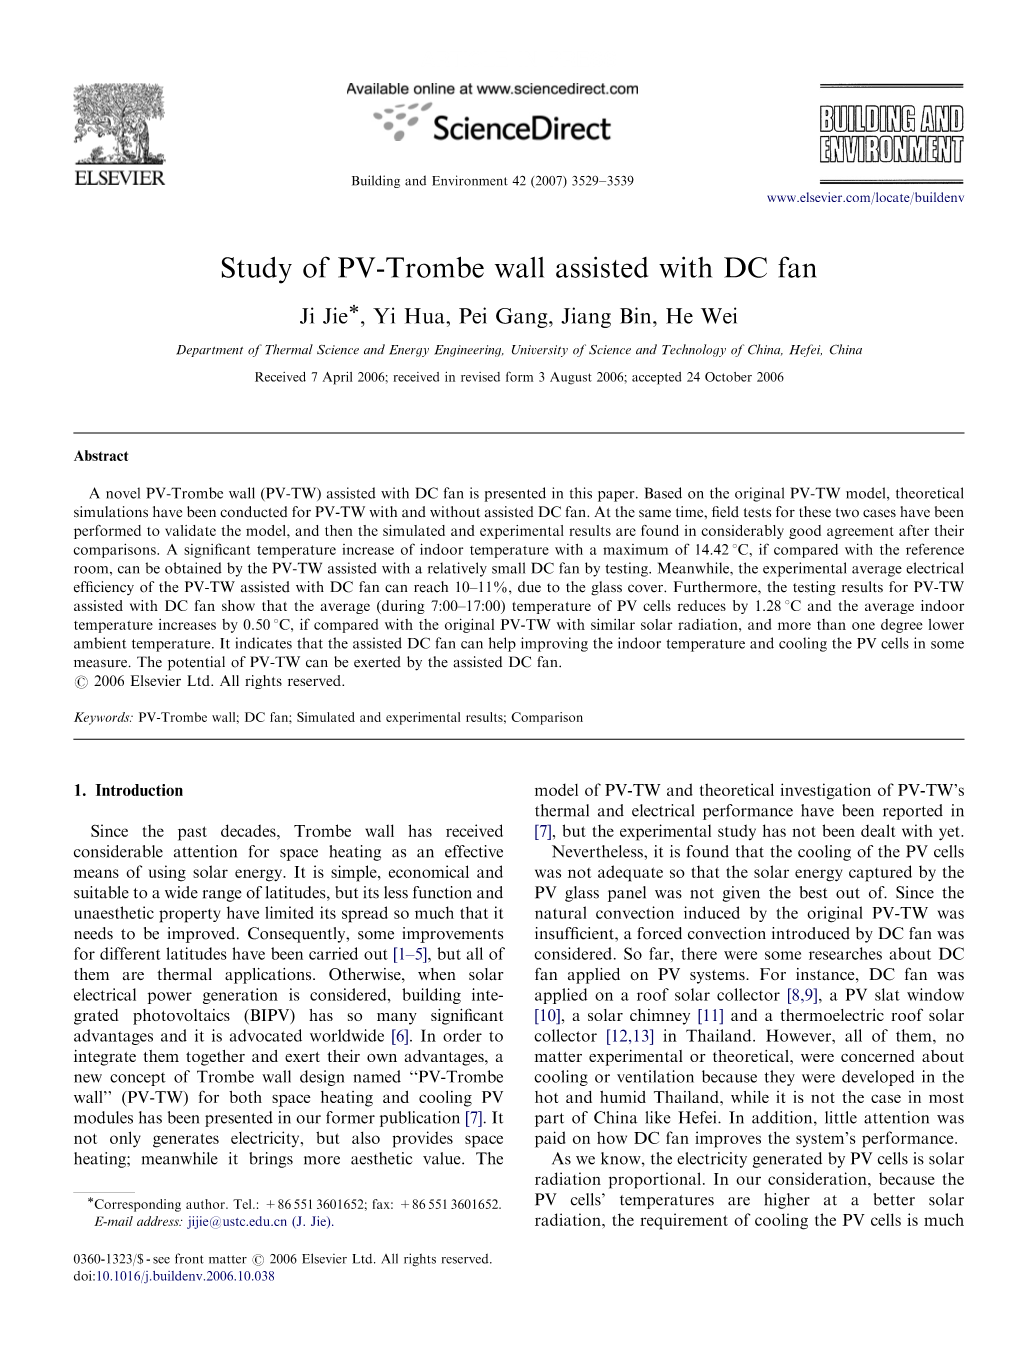 Study of PV-Trombe Wall Assisted with DC Fan